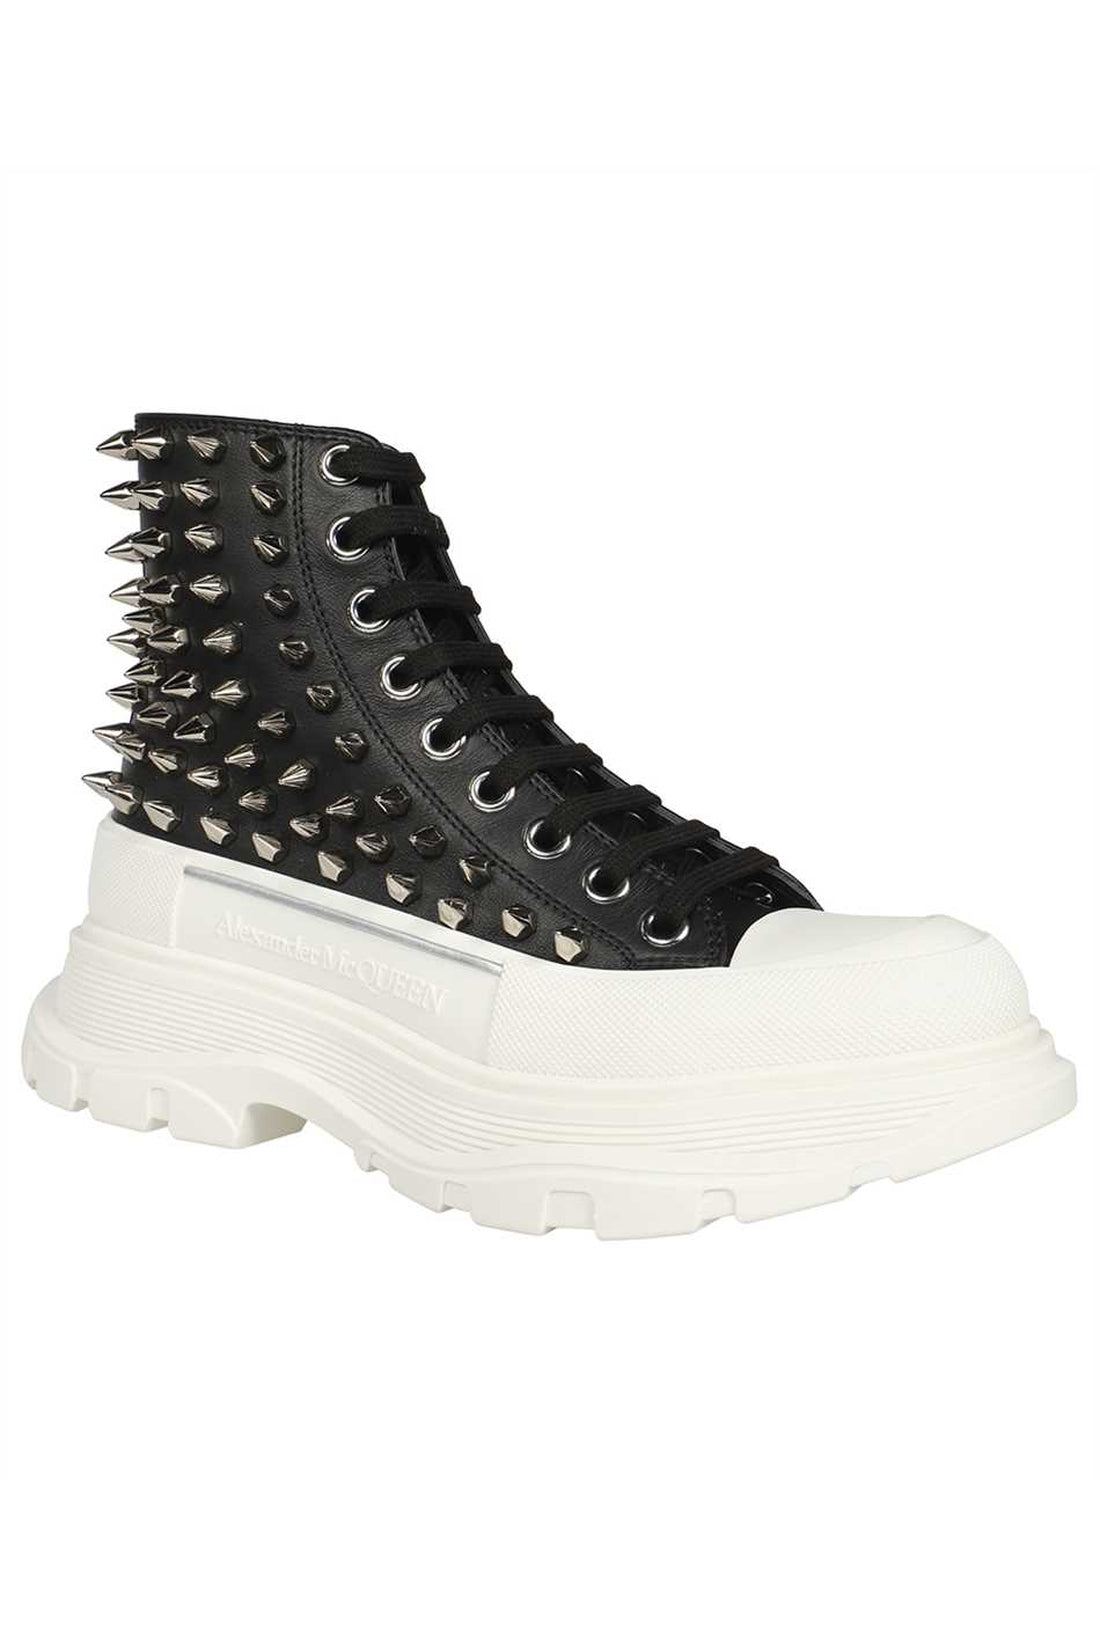 Alexander McQueen-OUTLET-SALE-Tread Slick leather lace-up ankle boots-ARCHIVIST